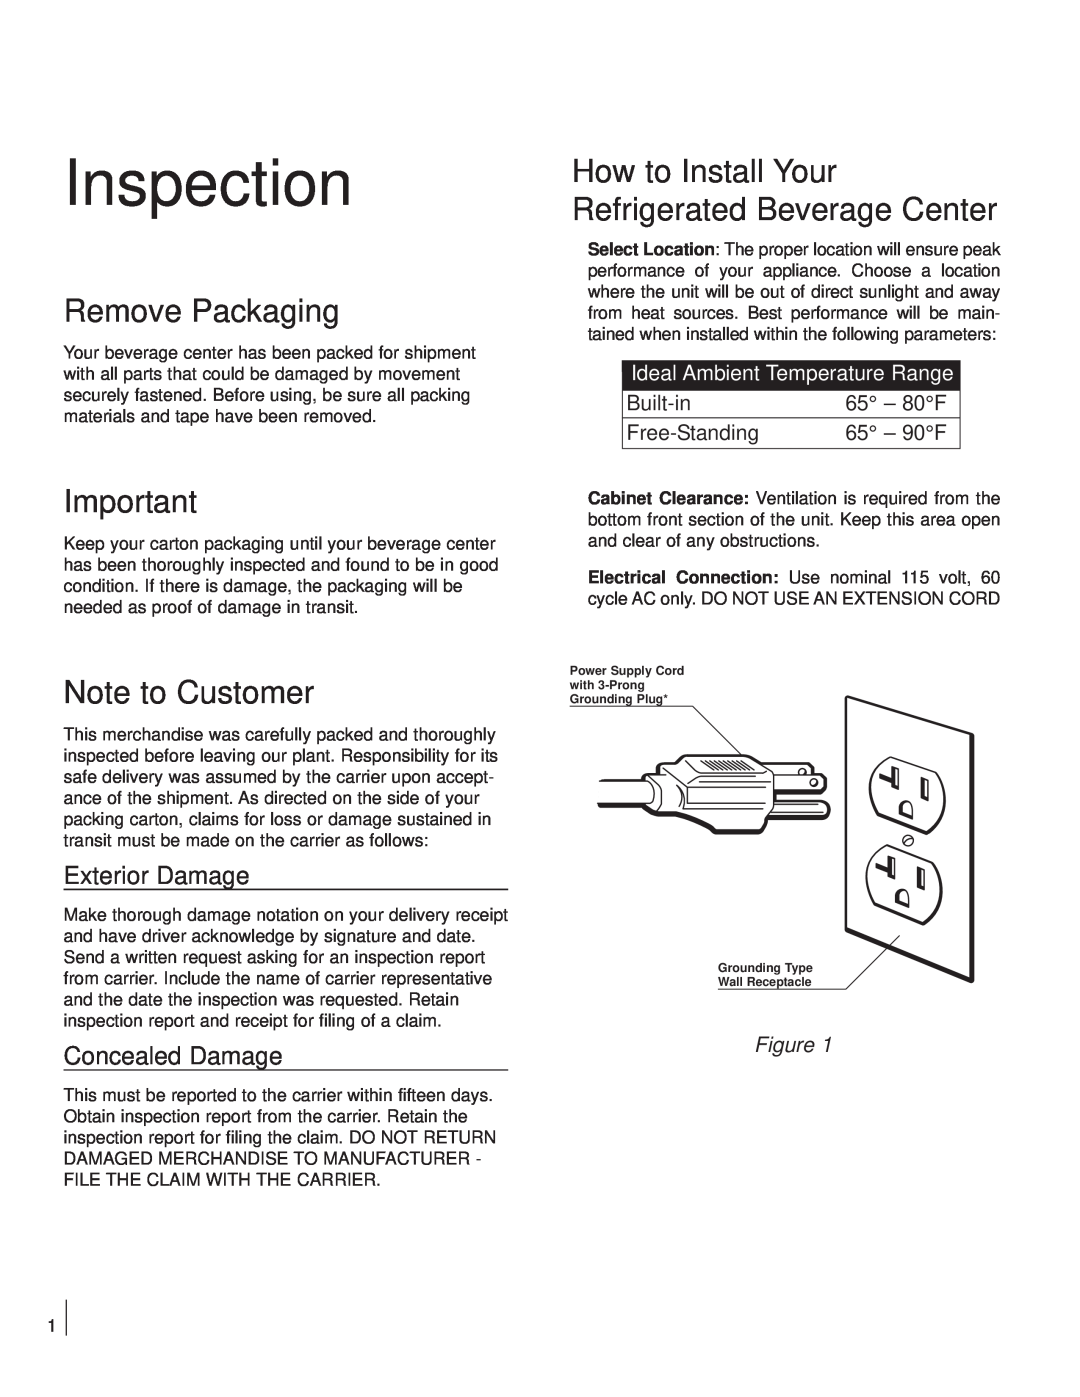 Marvel Industries 3SBAR Inspection, Remove Packaging, Note to Customer, How to Install Your Refrigerated Beverage Center 